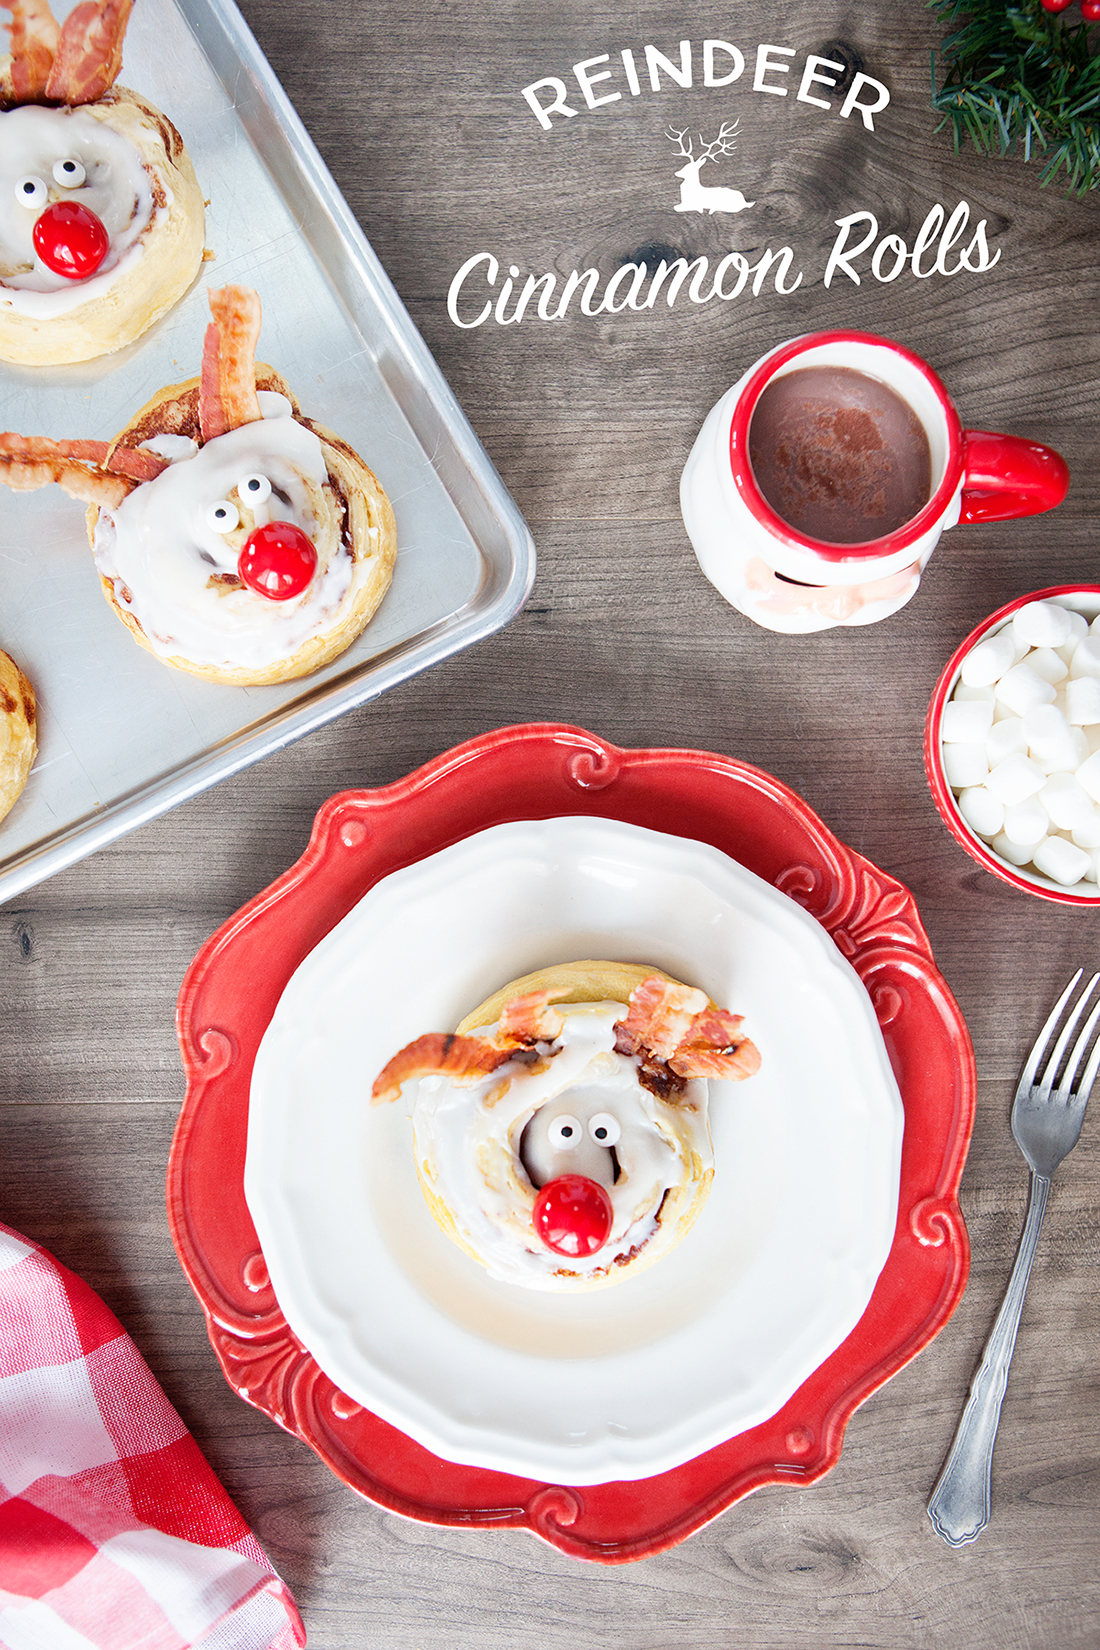 These Rudolph the Red-Nosed Reindeer Cinnamon Rolls will help make the holidays a bit more magical with minimal effort required!